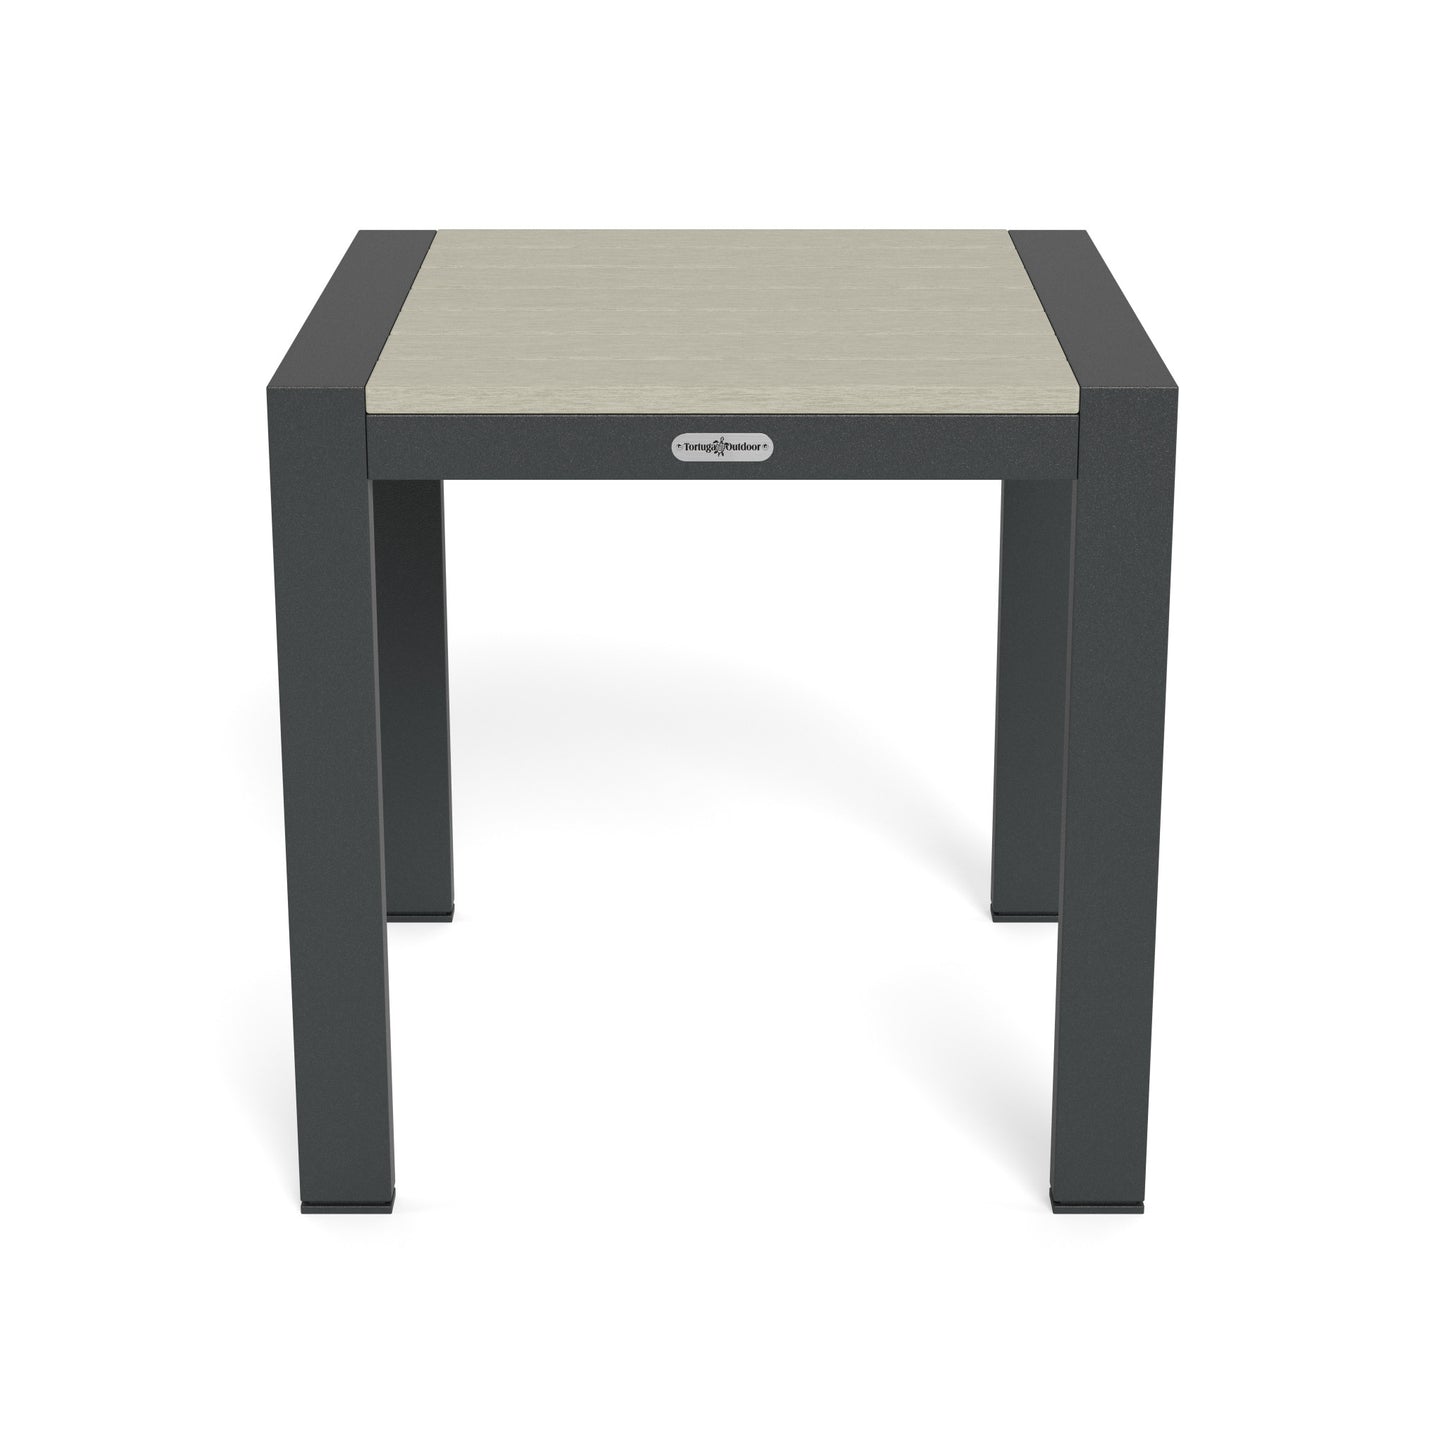 Lakeview, 2-Pc Seat Set, Chair/Side Table - Grey/Charcoal